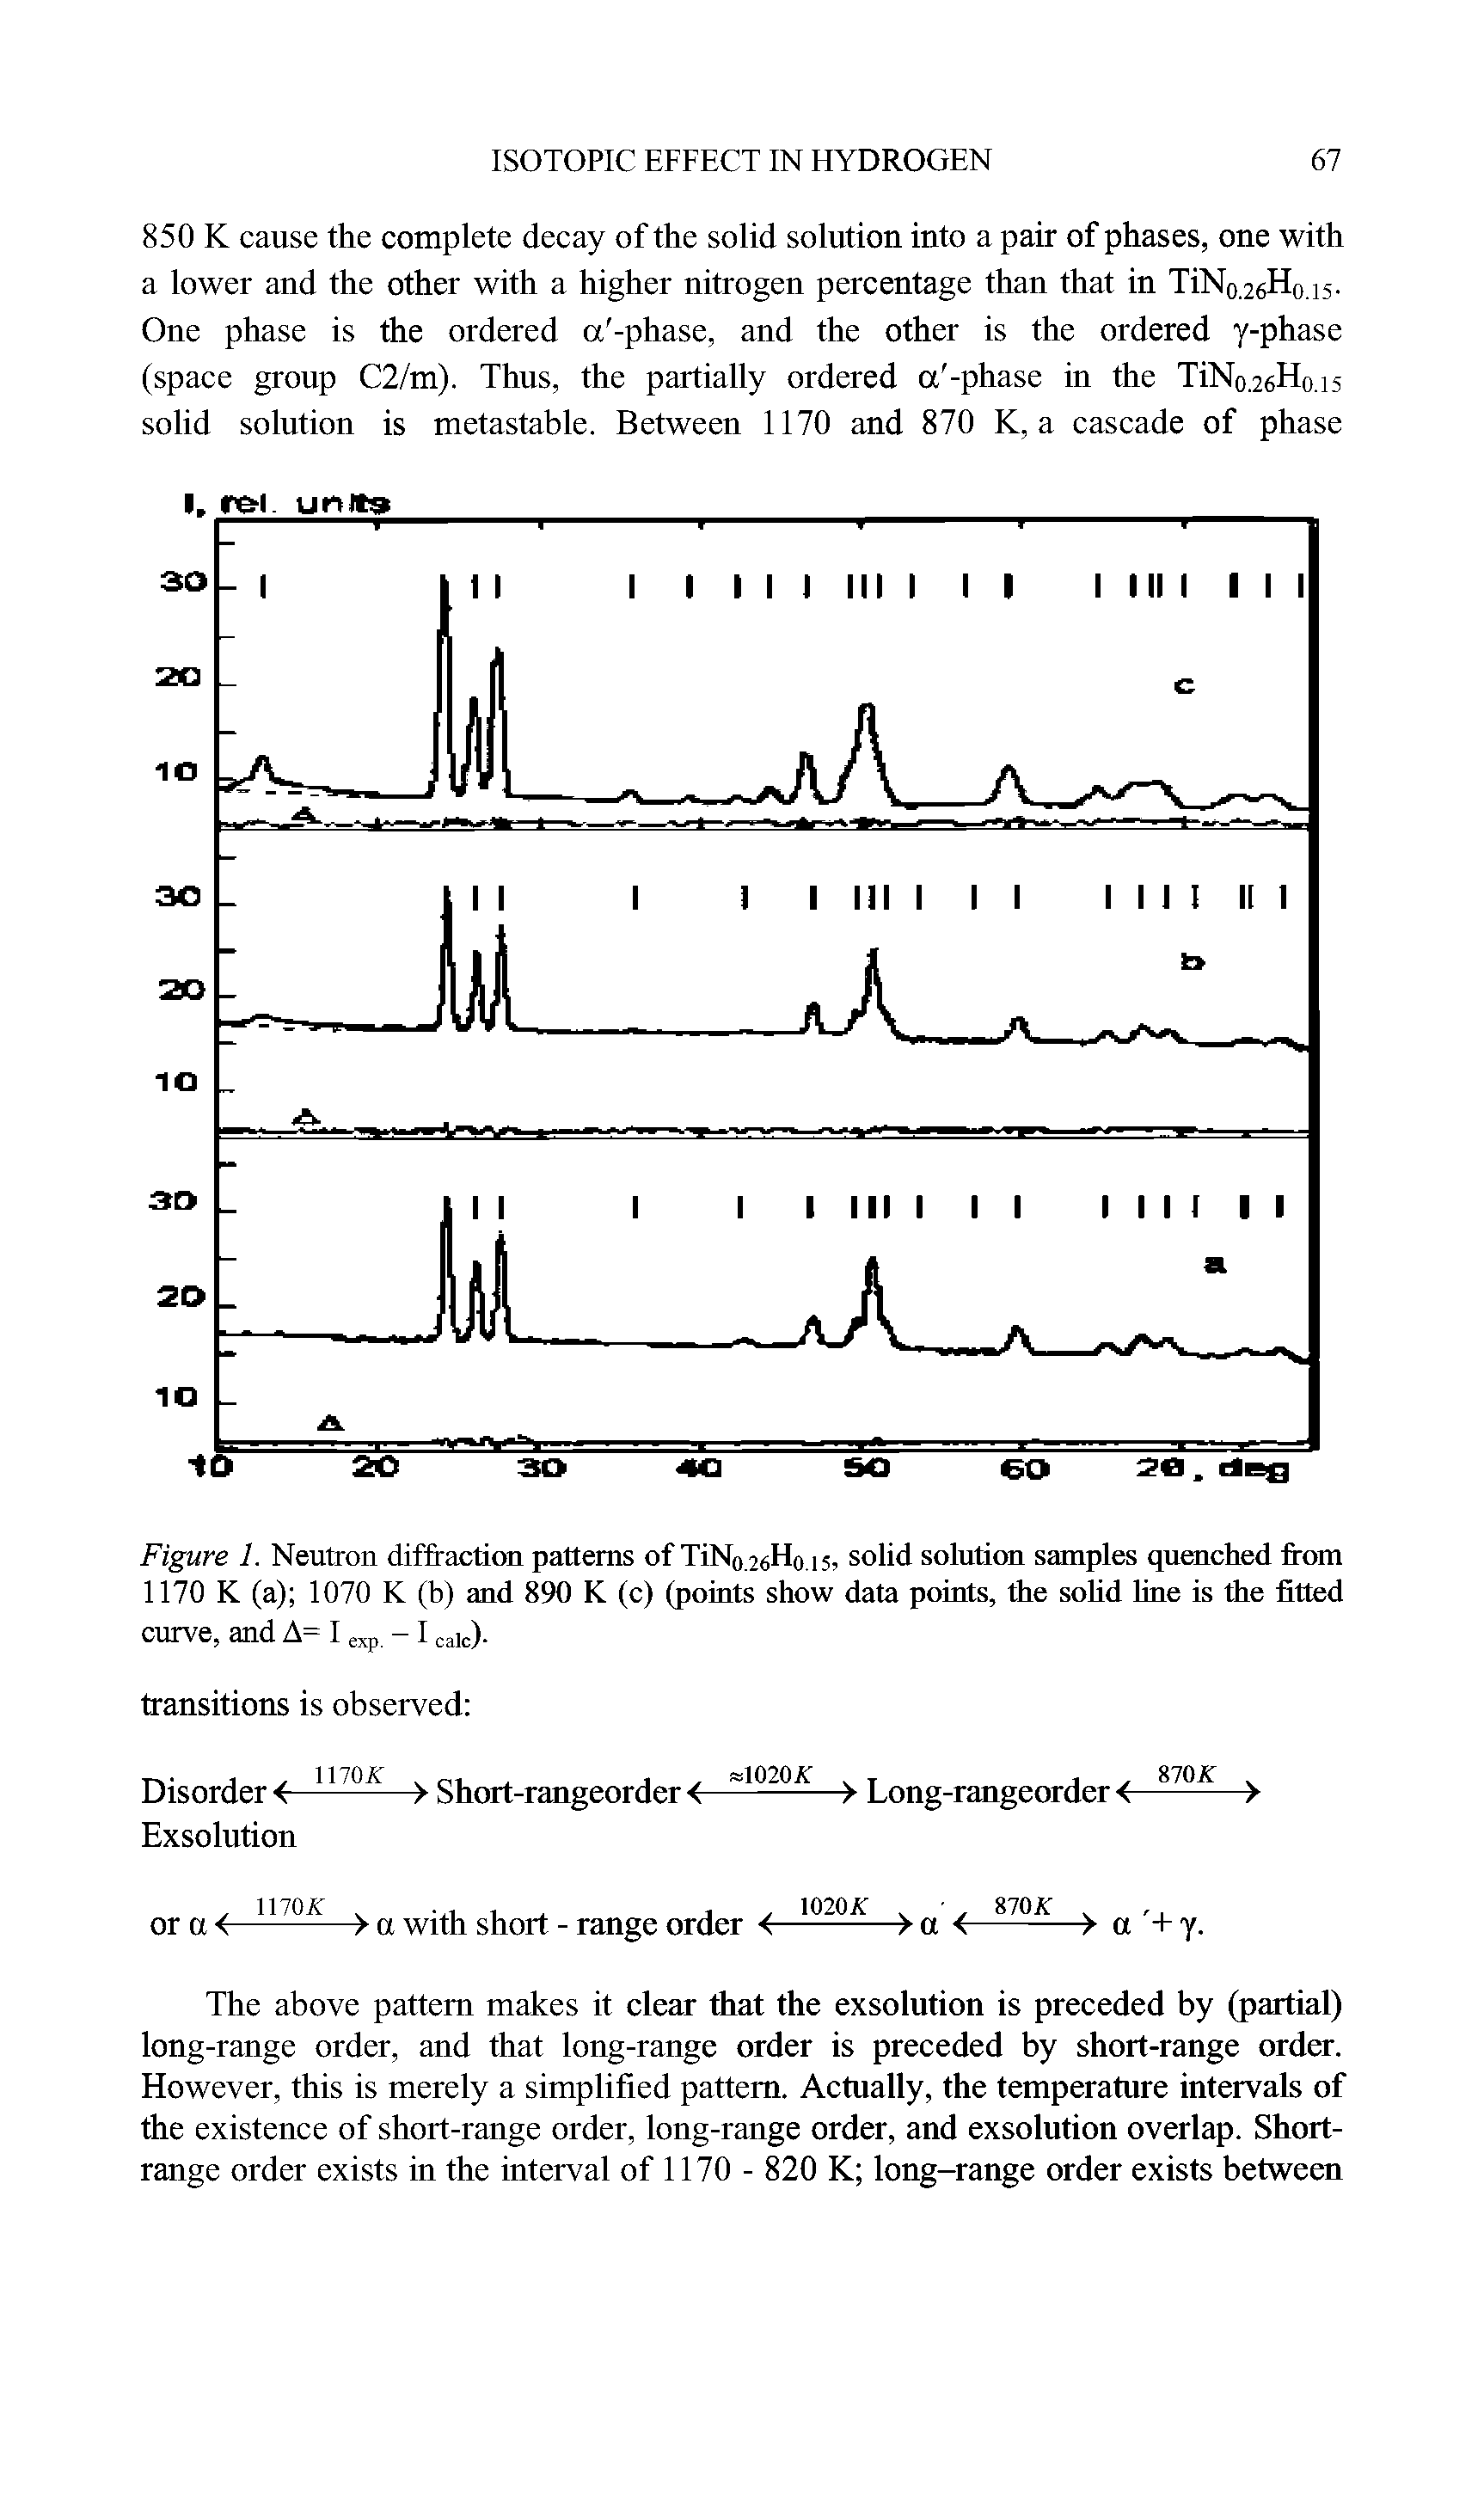 Figure 1. Neutron diffraction patterns of TiN0 26Ho 15, solid solution samples quenched from 1170 K (a) 1070 K (b) and 890 K (c) (points show data points, the solid line is the fitted curve, and A= I exp. - I cak)-...